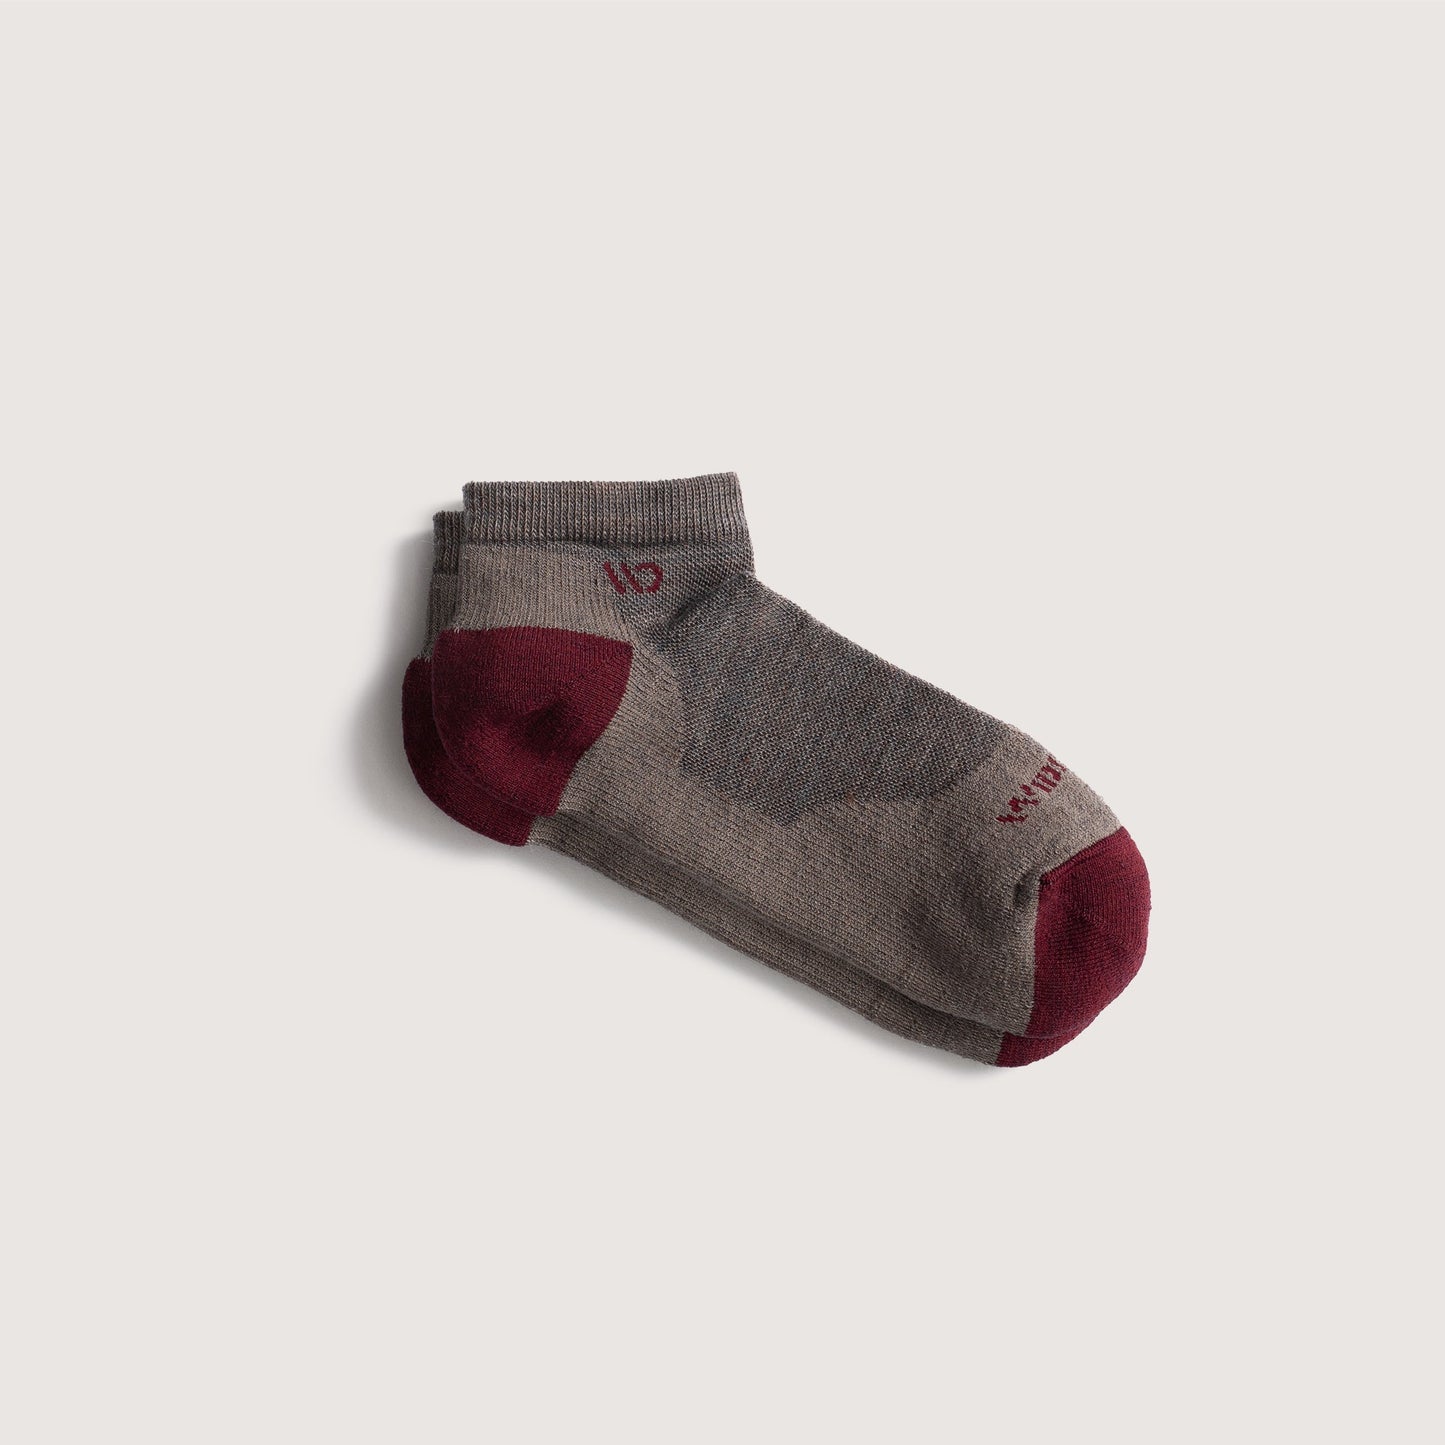 Flat socks featuring maroon heel/toe and logo, with taupe body--Light Teal/Denim/Taupe